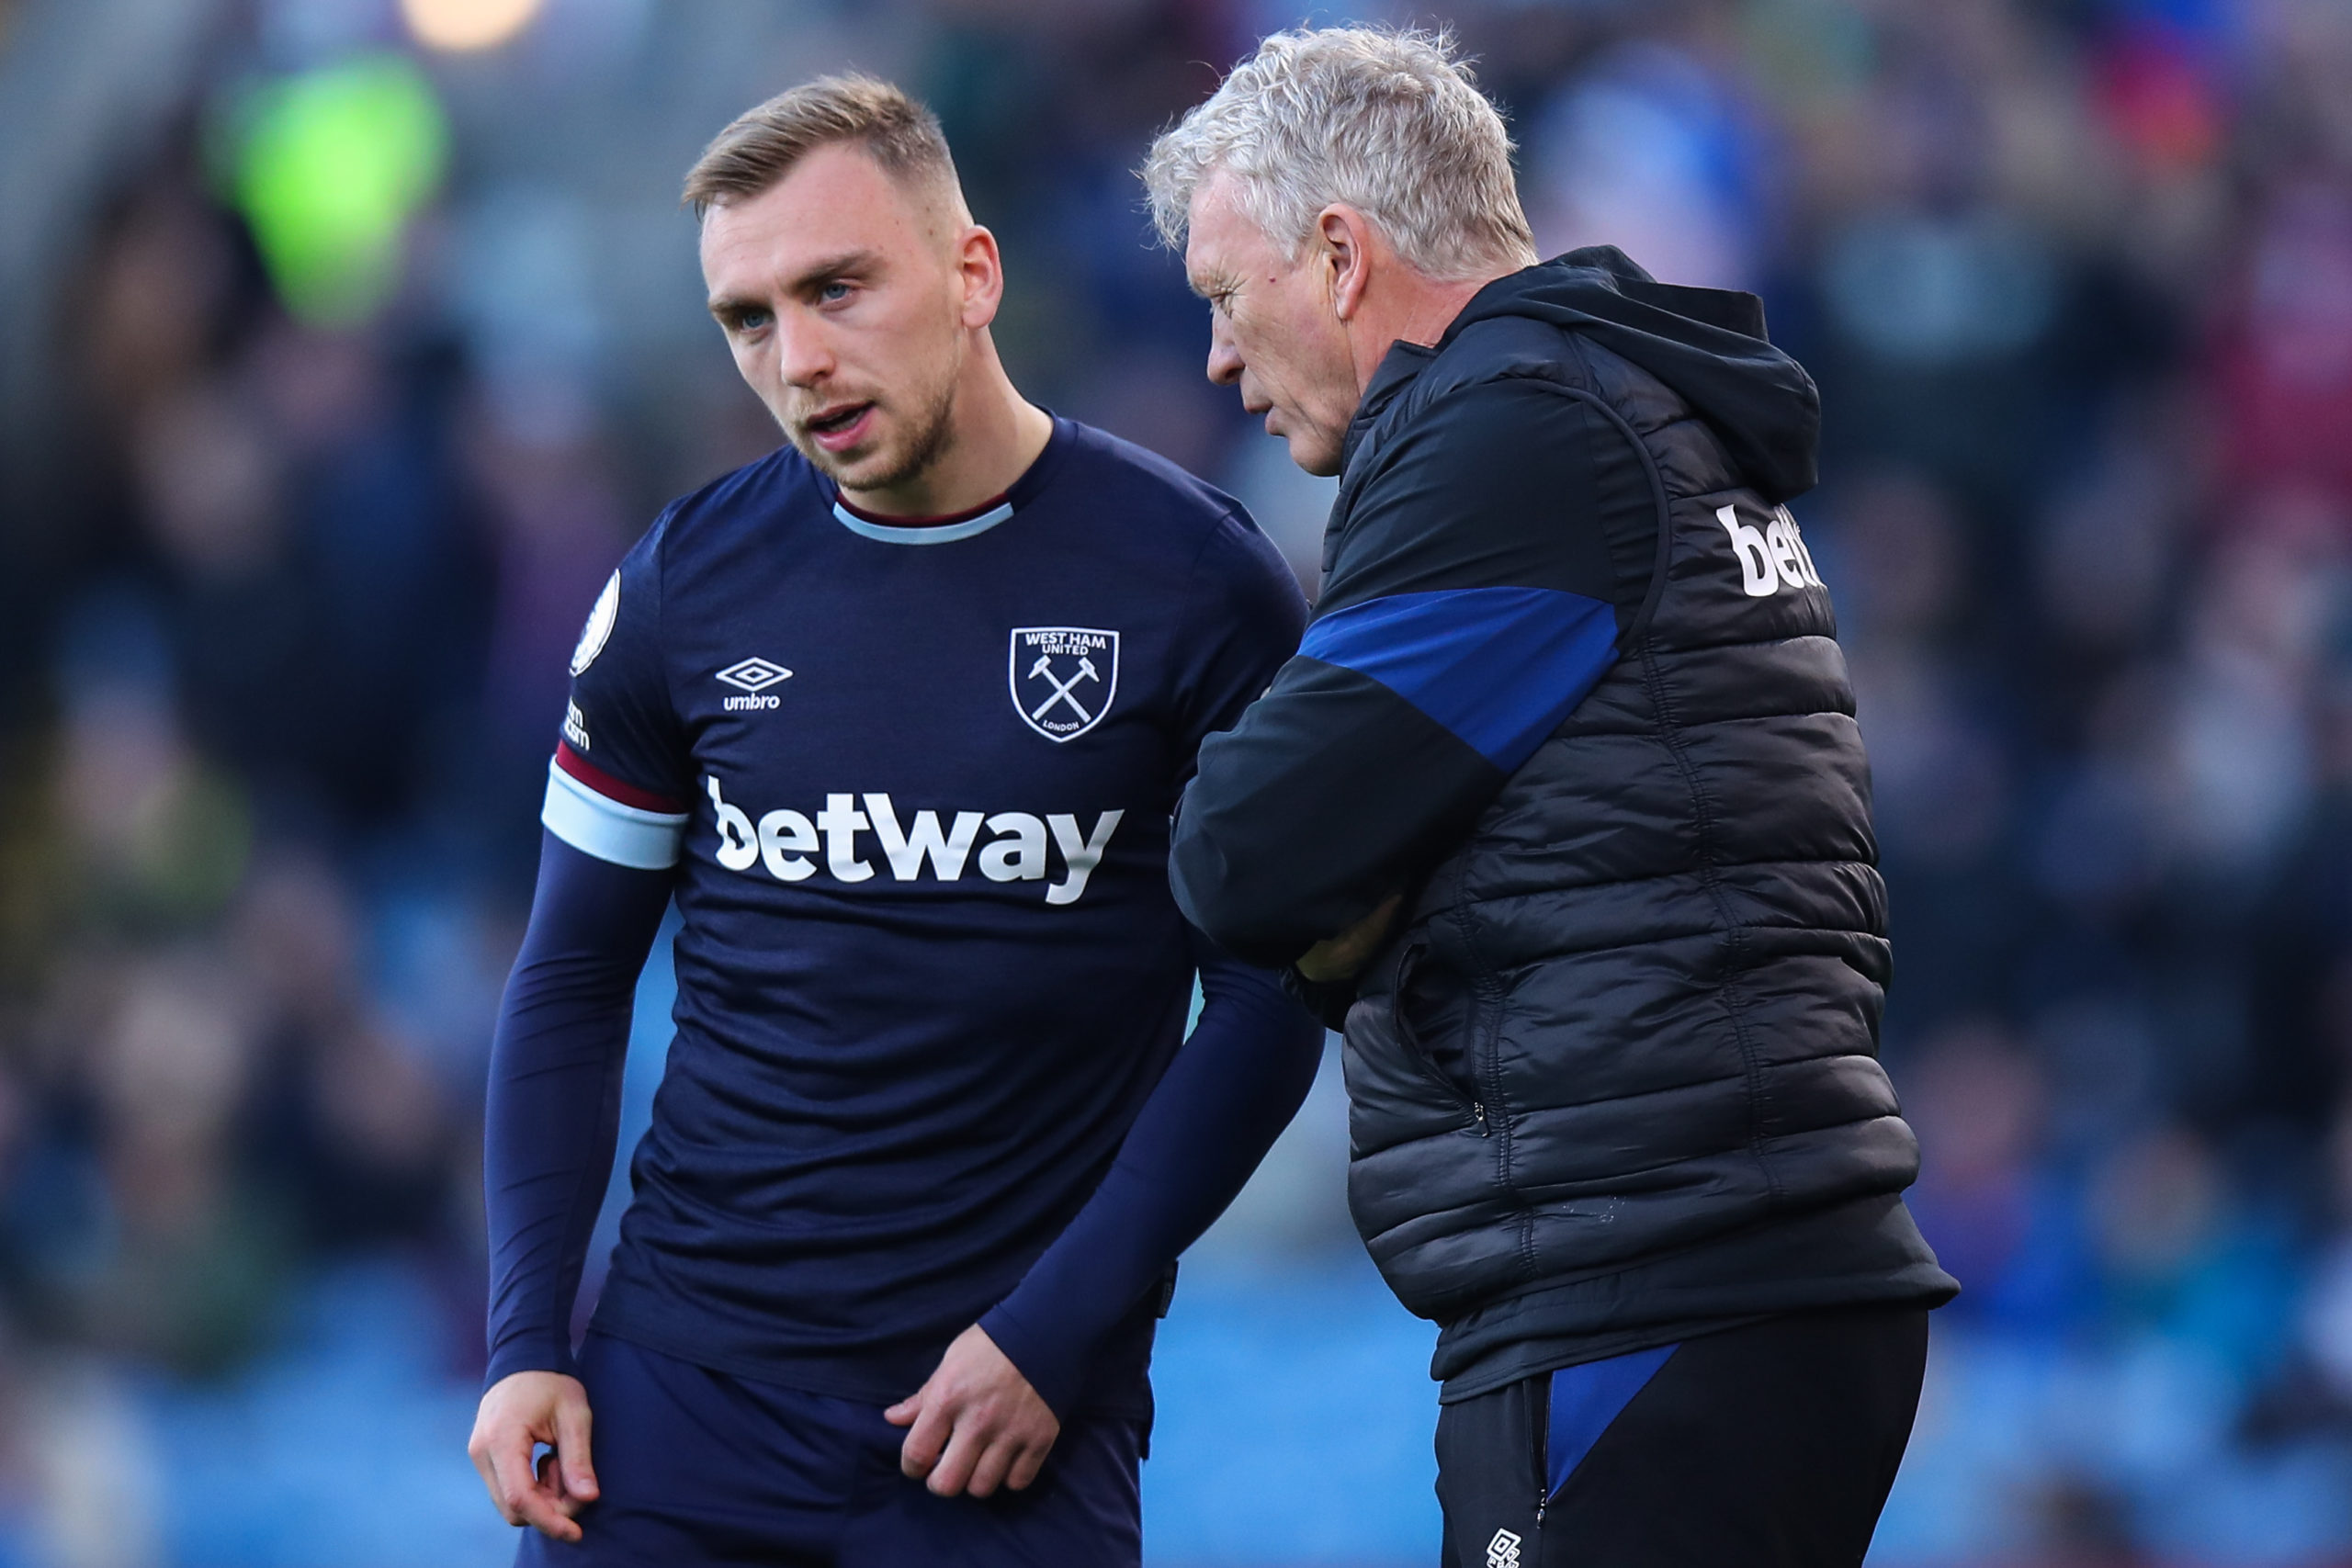 David Moyes lifts the lid on what he has heard about West Ham star Jarrod Bowen